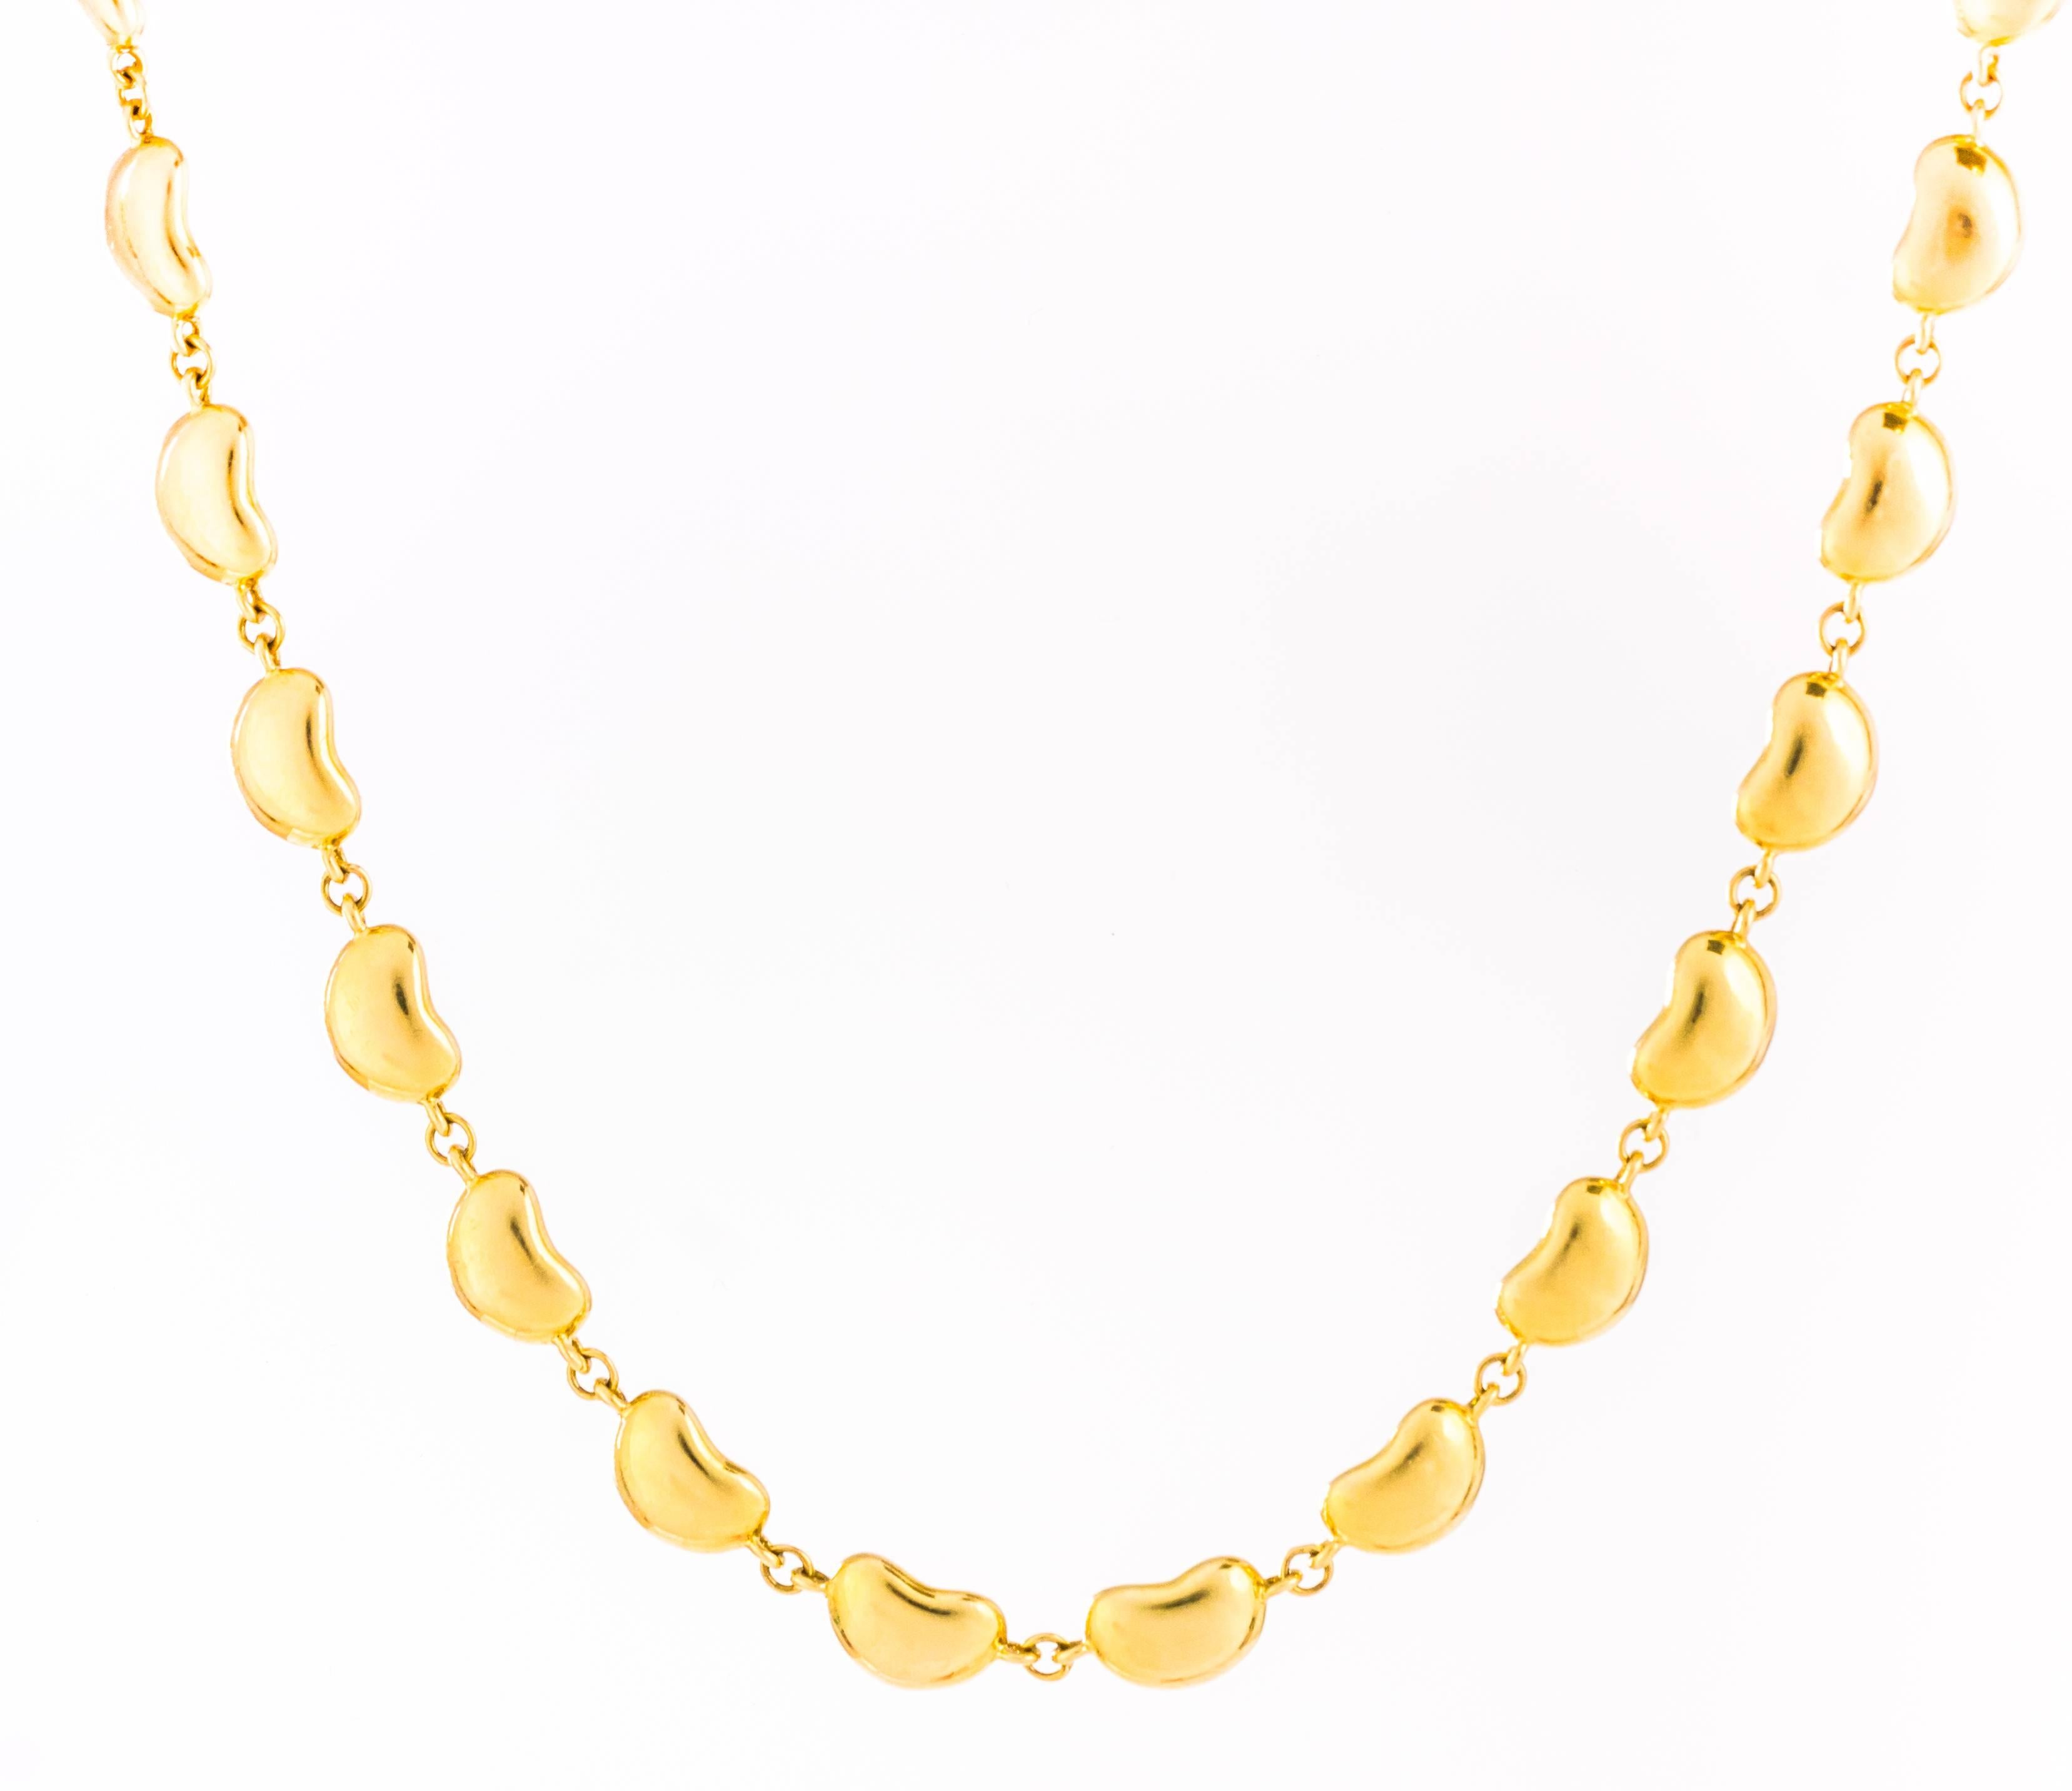 This very rare 1990s Tiffany and Co. Elsa Peretti Bean Collection necklace has 38.8 grams of 18 Karat Yellow Gold. Most of the Bean collection necklaces were produced in silver, not gold. Each bean link measures approximately 7.5 millimeters by 5